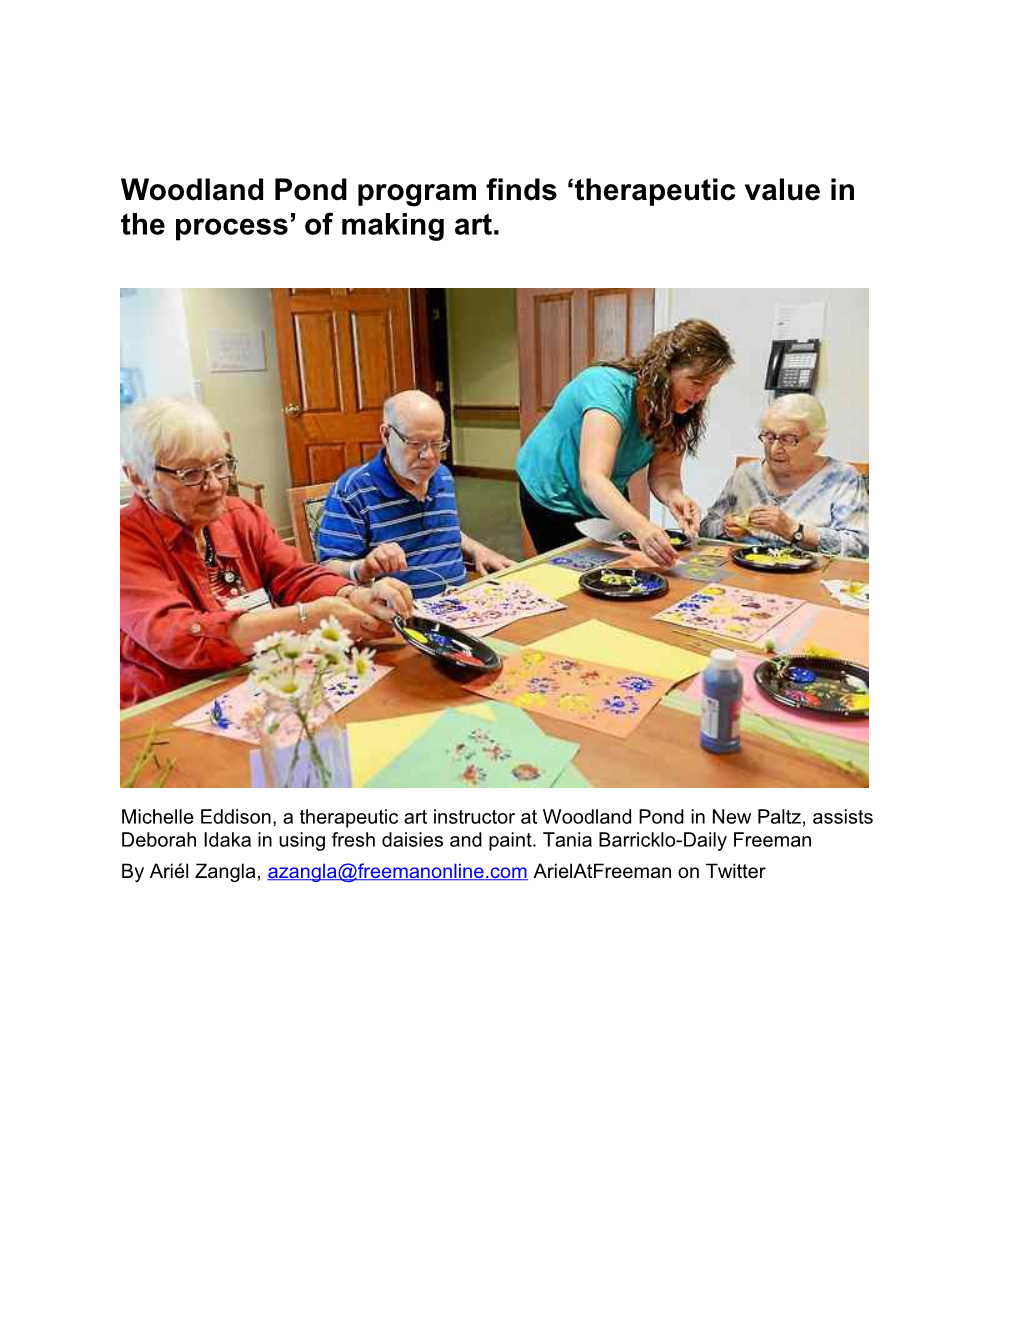 Woodland Pond Program Finds Therapeutic Value in the Process of Making Art